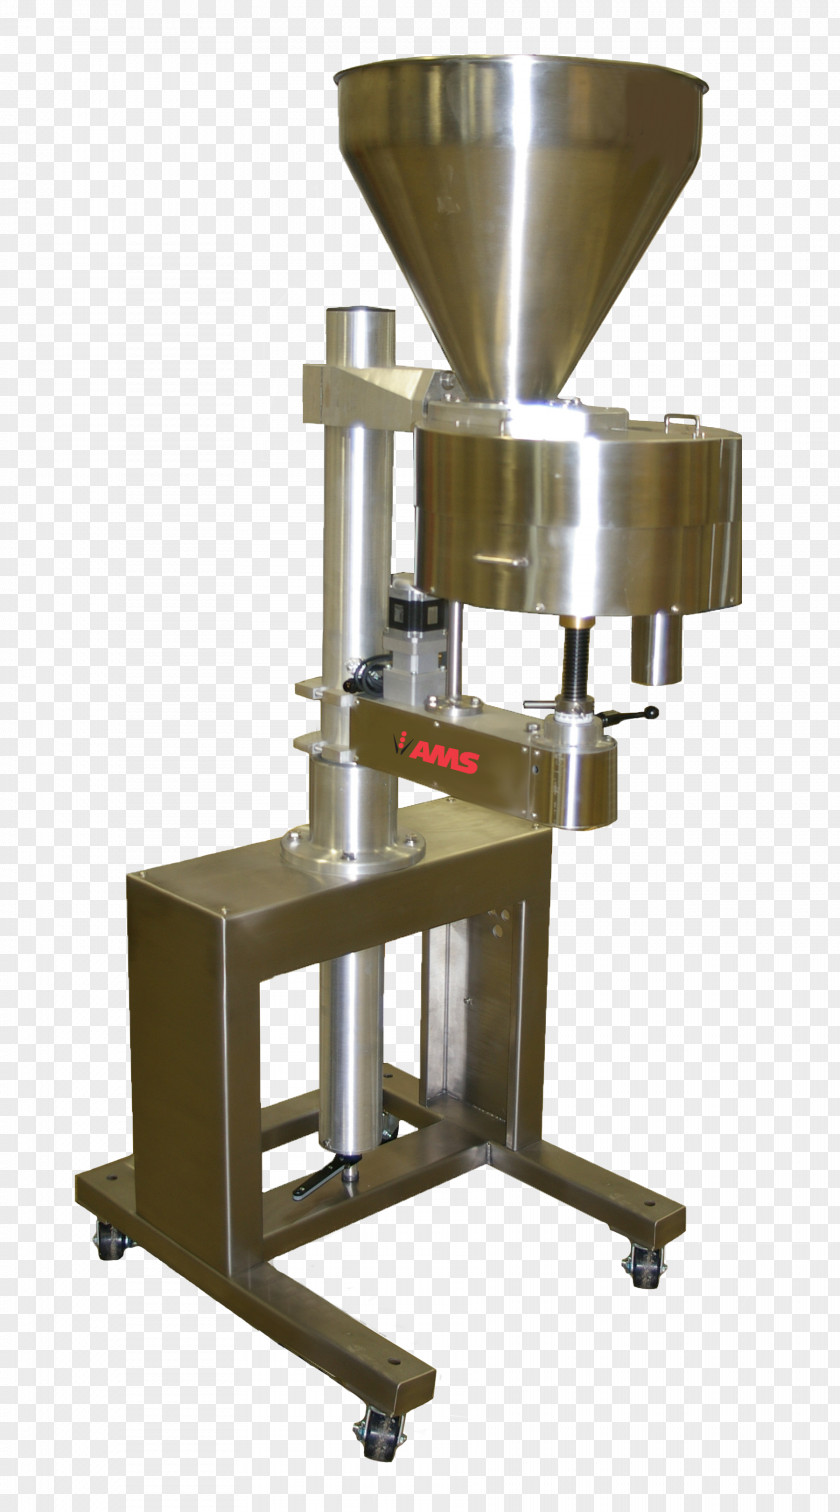 Chemical Automatics Design Bureau Machine AMS Filling Systems Inc Spheretech Packaging India Private Limited Manufacturing Industrial PNG